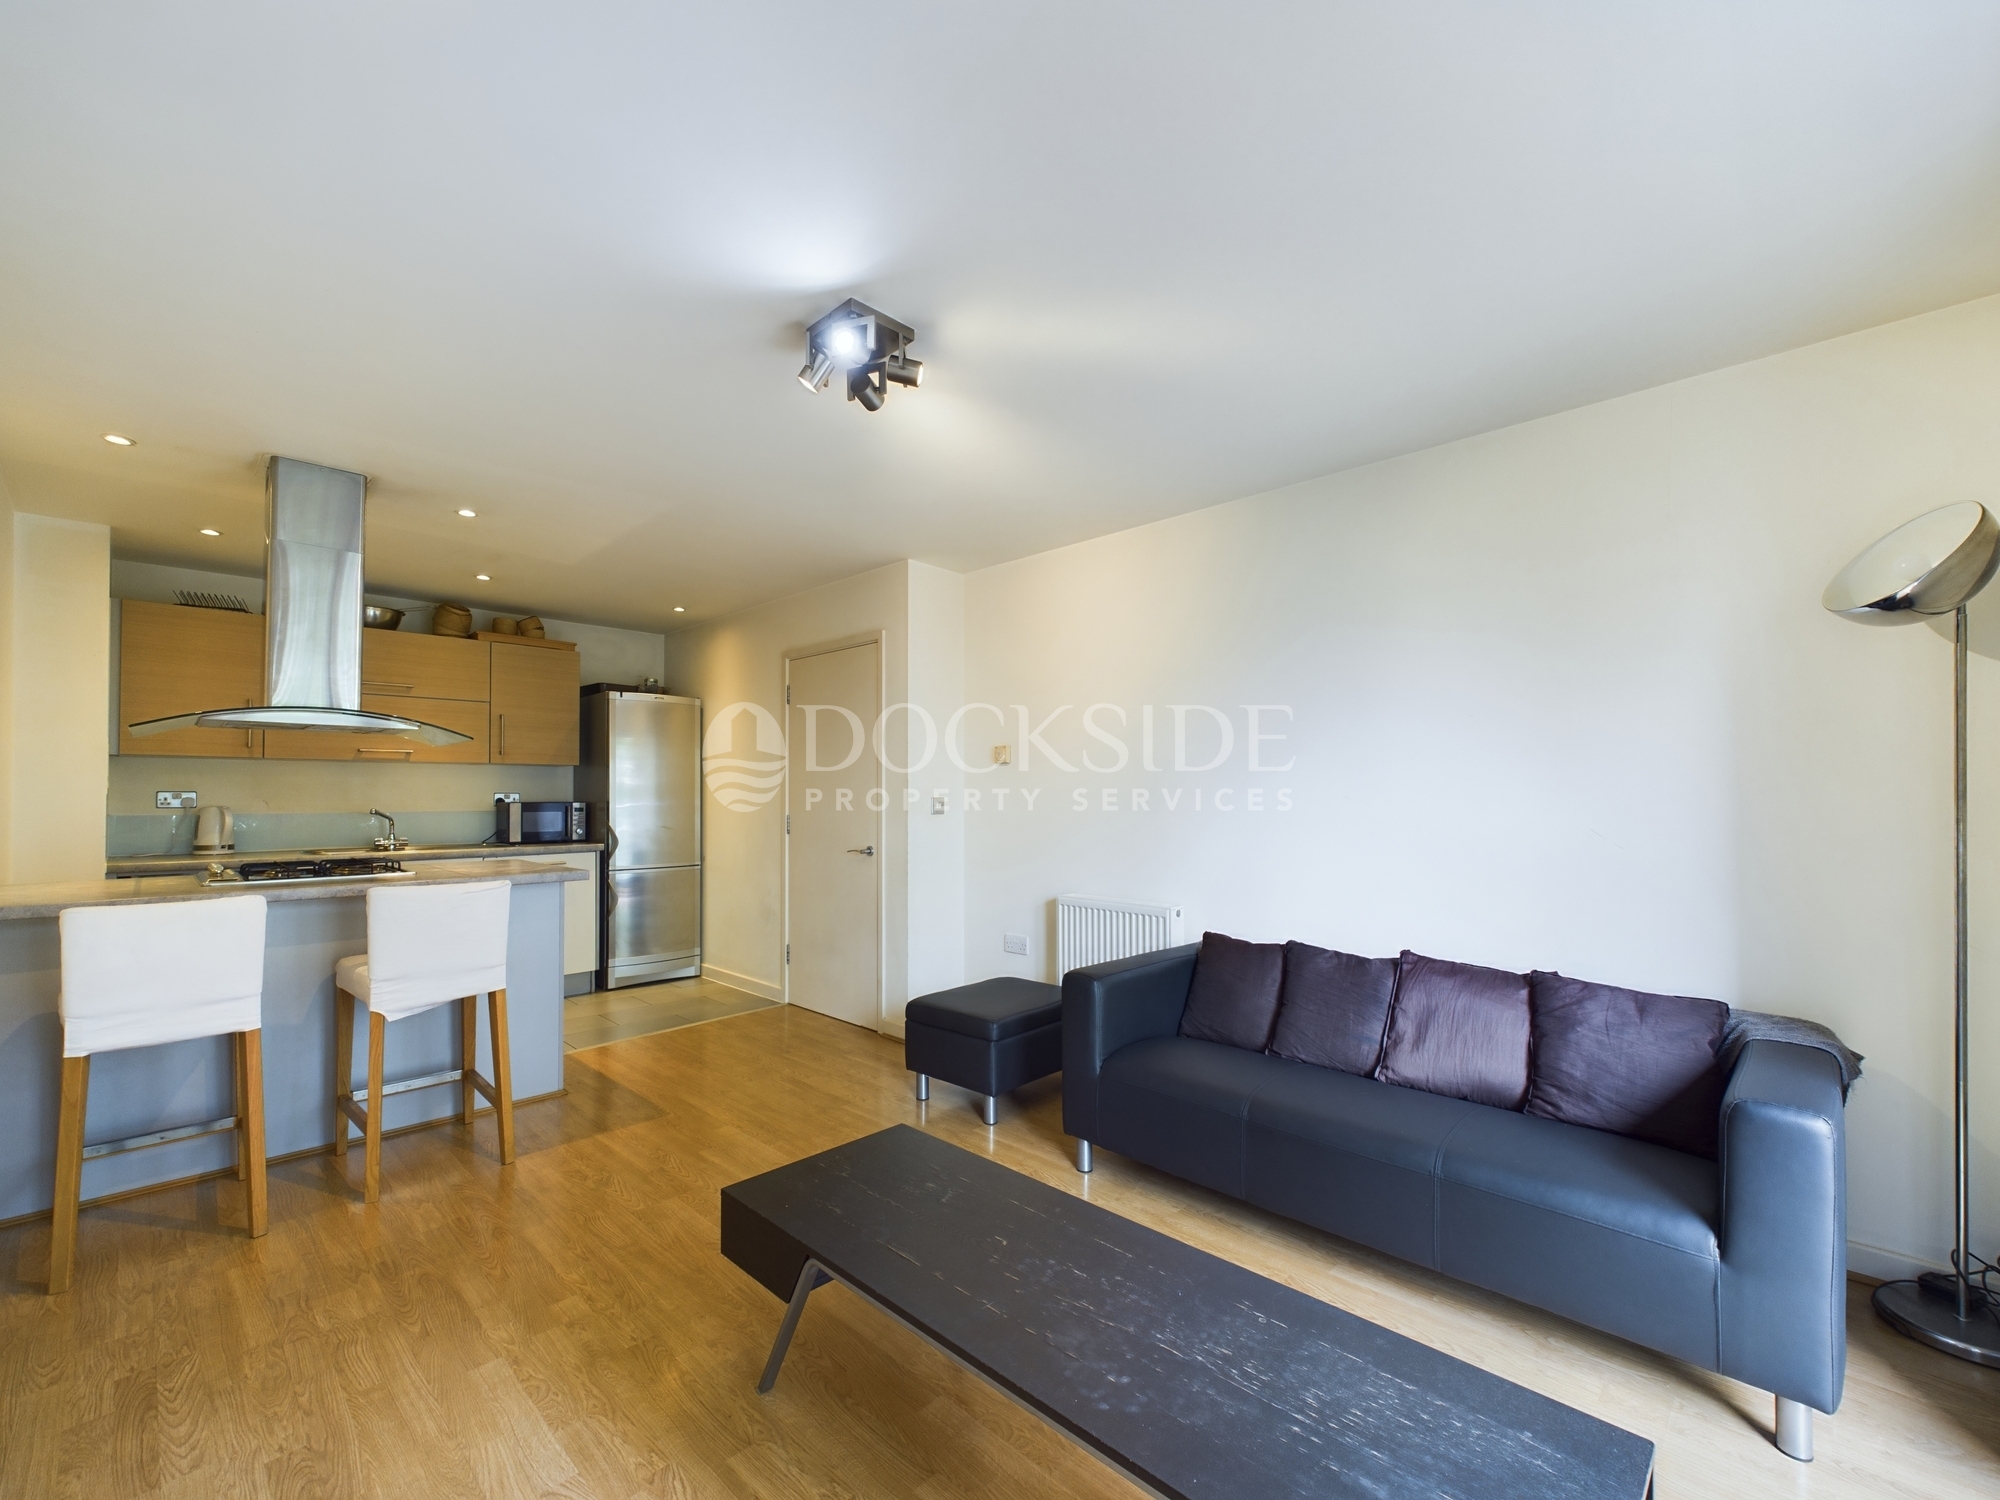 2 bed to rent in Commercial Road, London, E14 